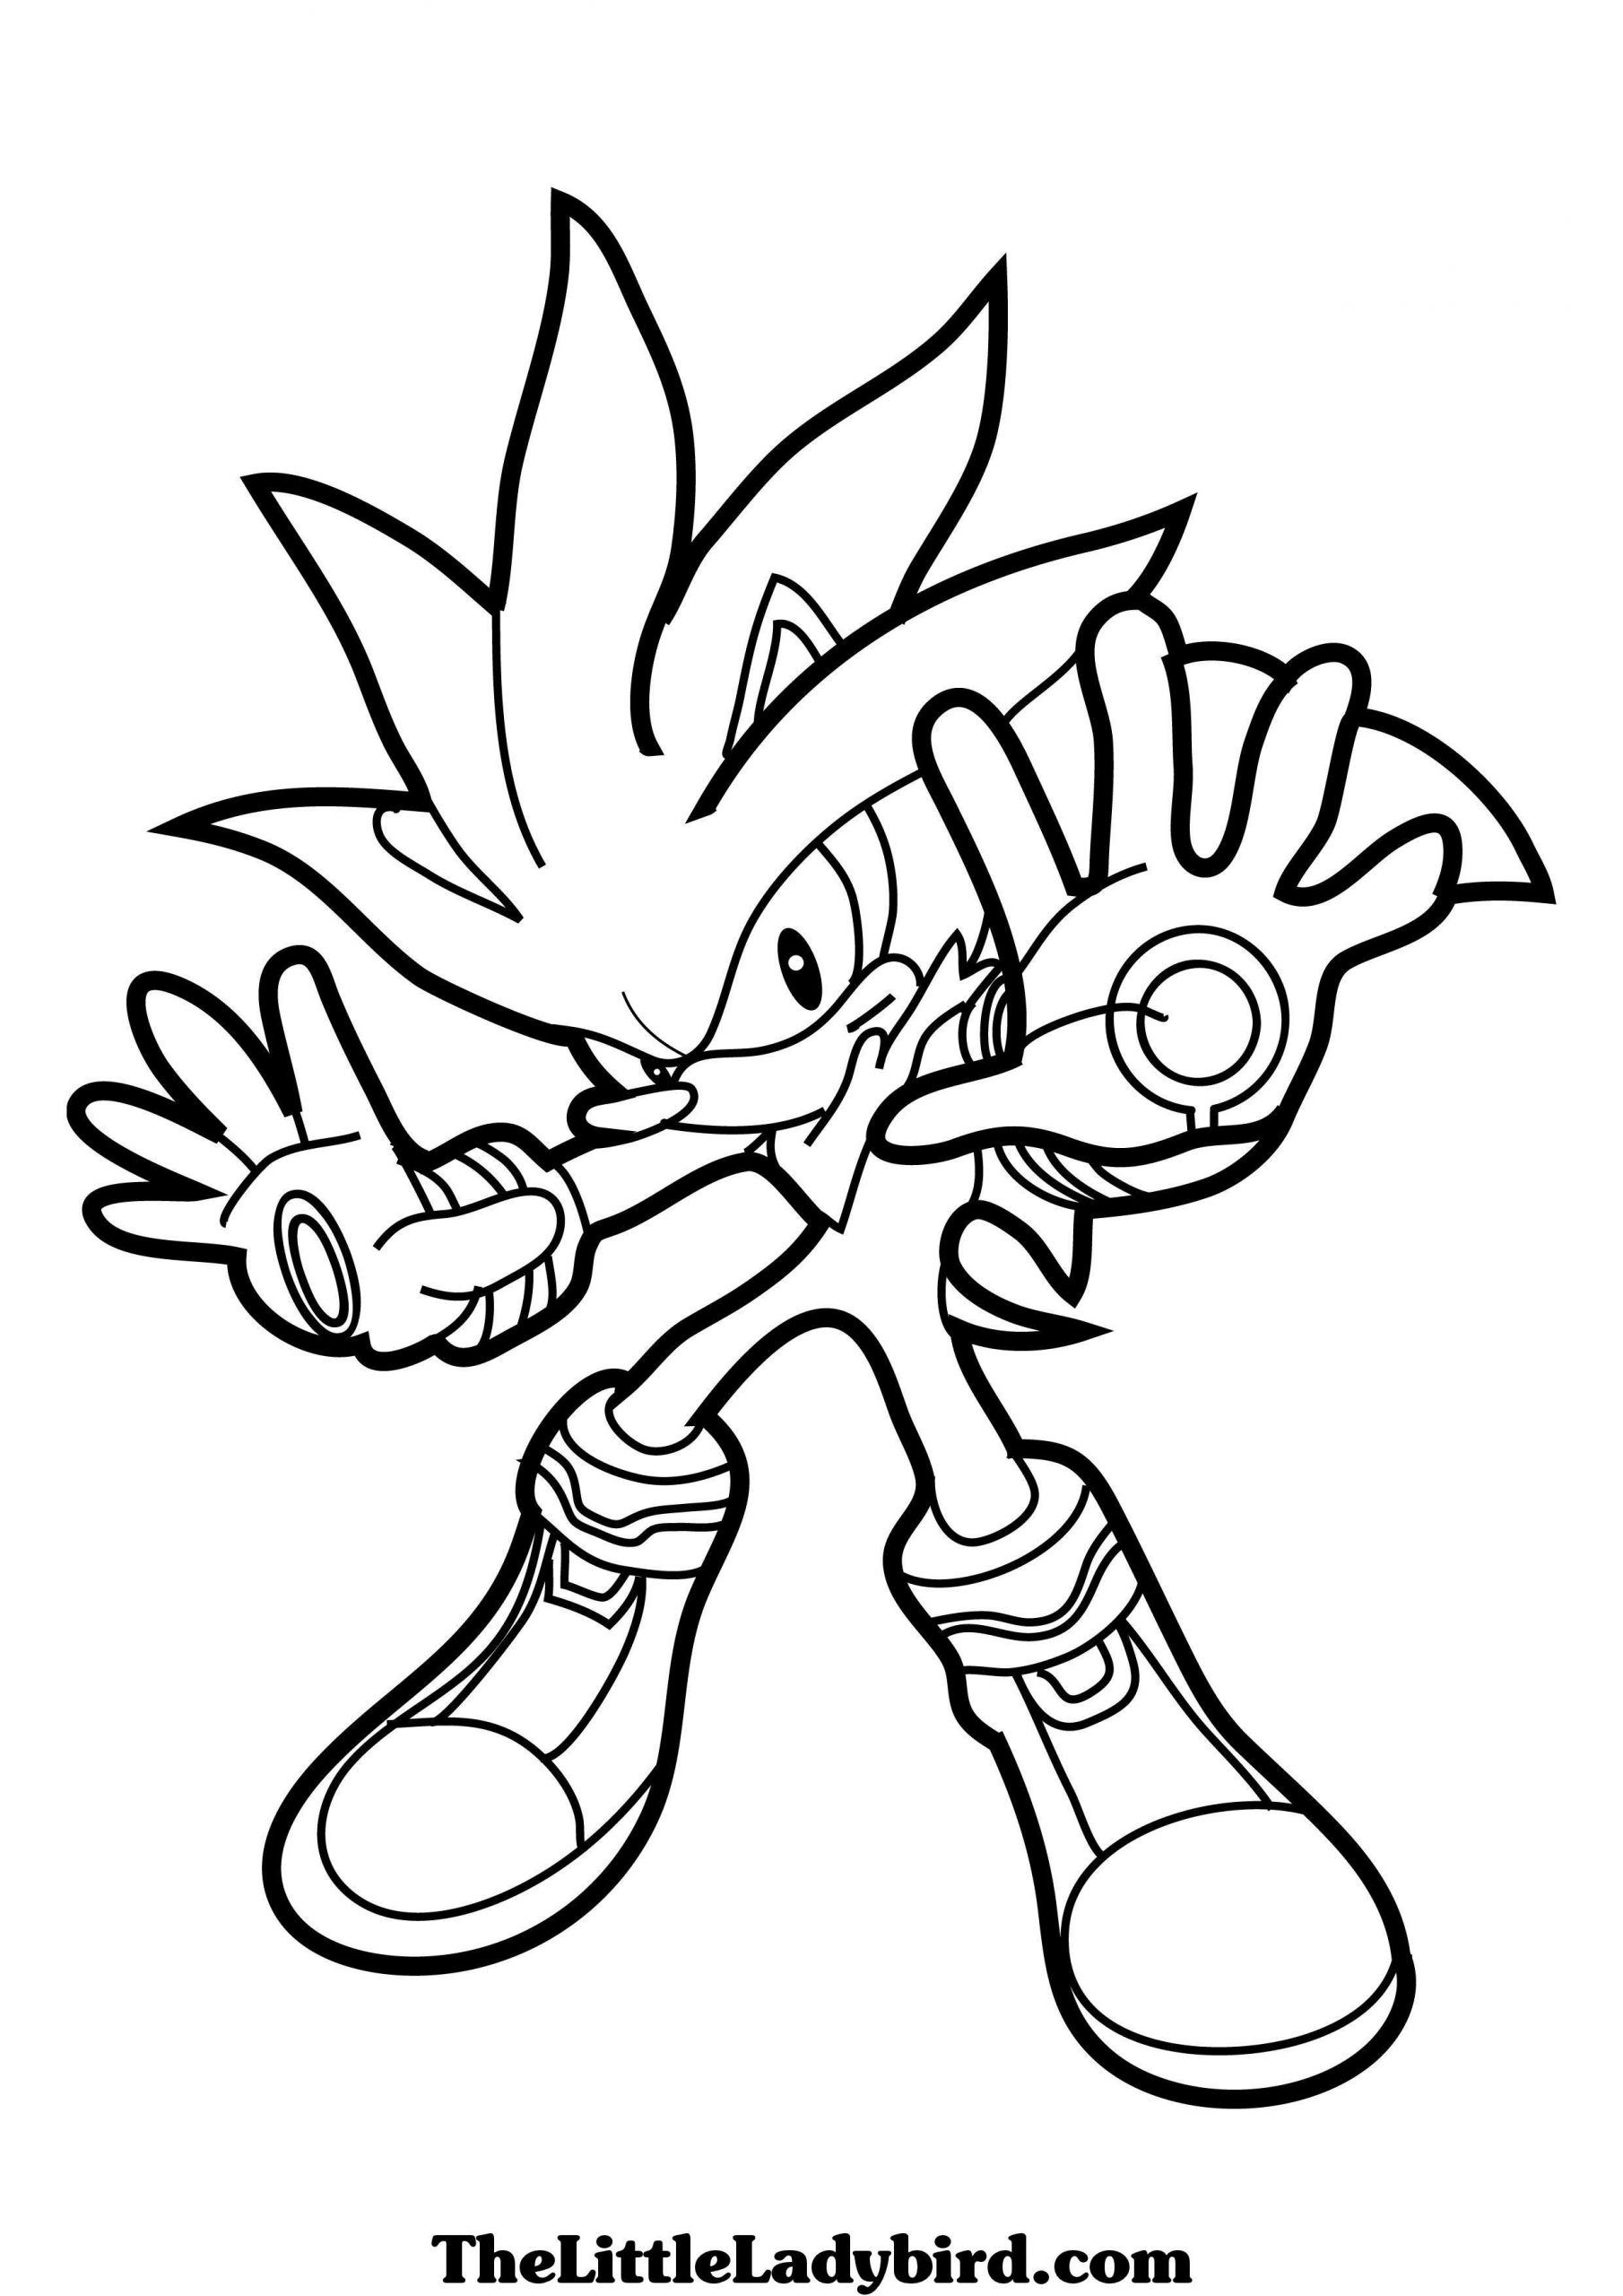 Coloring Books : Sonic Coloring Pages Best Colored Pencils For ...